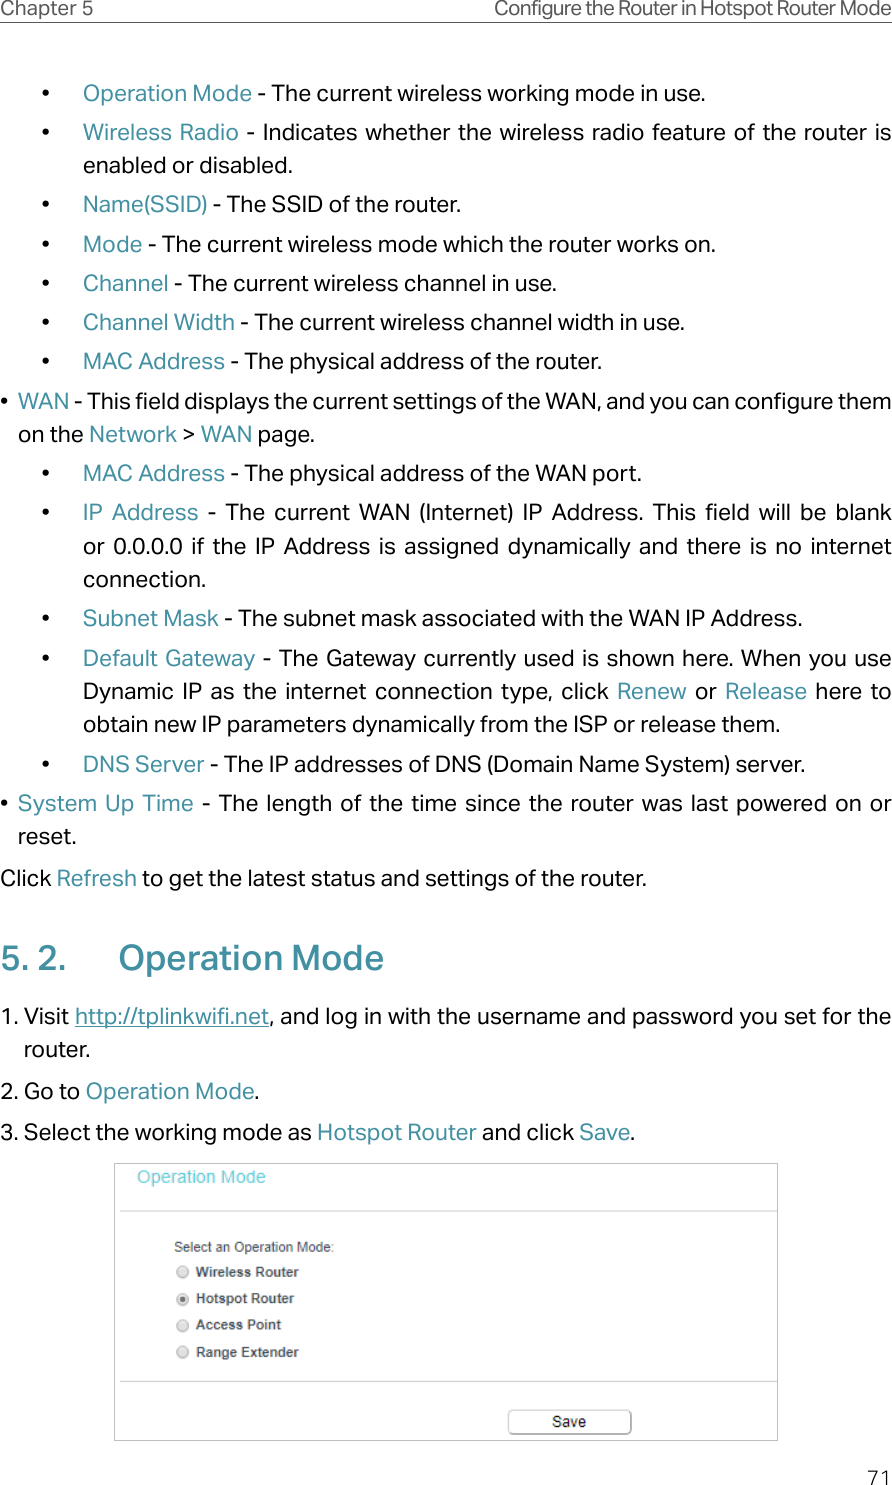 71Chapter 5 Configure the Router in Hotspot Router Mode•  Operation Mode - The current wireless working mode in use.•  Wireless Radio - Indicates whether the wireless radio feature of the router is enabled or disabled.•  Name(SSID) - The SSID of the router.•  Mode - The current wireless mode which the router works on.•  Channel - The current wireless channel in use.•  Channel Width - The current wireless channel width in use.•  MAC Address - The physical address of the router.•  WAN - This field displays the current settings of the WAN, and you can configure them on the Network &gt; WAN page.•  MAC Address - The physical address of the WAN port.•  IP Address - The current WAN (Internet) IP Address. This field will be blank or 0.0.0.0 if the IP Address is assigned dynamically and there is no internet connection.•  Subnet Mask - The subnet mask associated with the WAN IP Address.•  Default Gateway - The Gateway currently used is shown here. When you use Dynamic IP as the internet connection type, click Renew  or  Release here to obtain new IP parameters dynamically from the ISP or release them.•  DNS Server - The IP addresses of DNS (Domain Name System) server.•  System Up Time - The length of the time since the router was last powered on or reset.Click Refresh to get the latest status and settings of the router.5. 2.  Operation Mode1. Visit http://tplinkwifi.net, and log in with the username and password you set for the router.2. Go to Operation Mode. 3. Select the working mode as Hotspot Router and click Save.